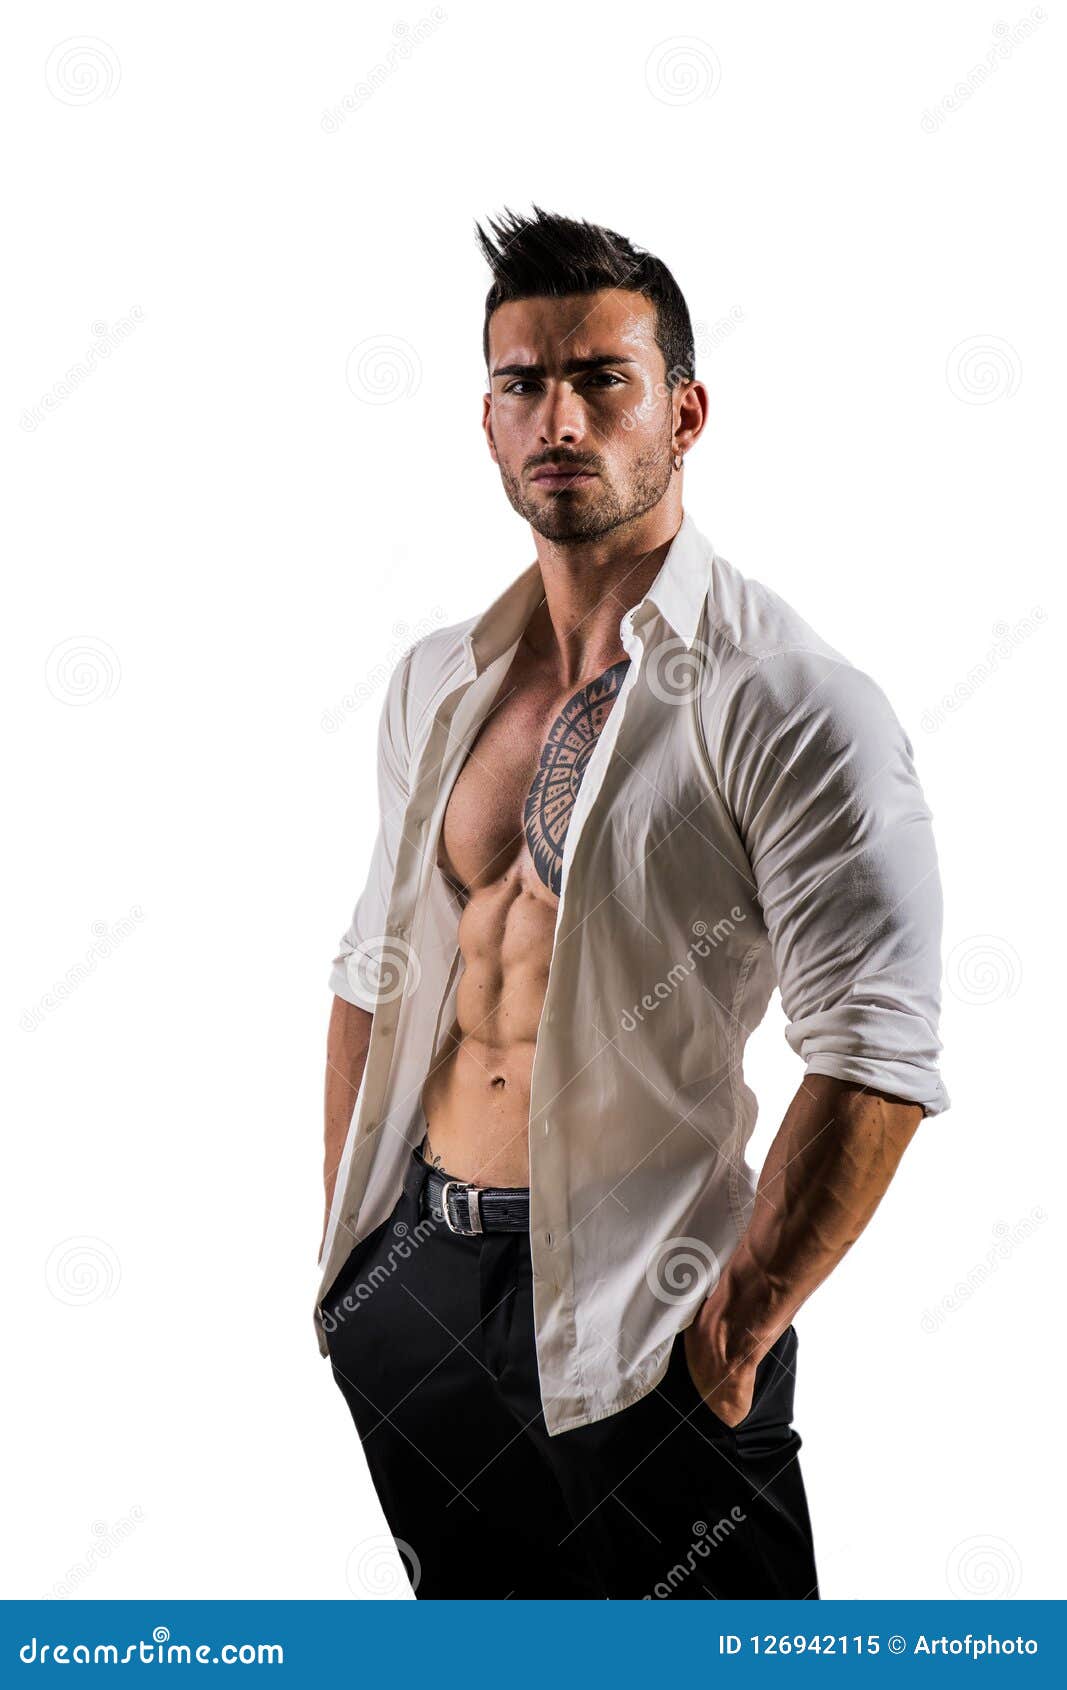 Man with White Shirt Open on Naked Torso Stock Image - Image of muscles ...